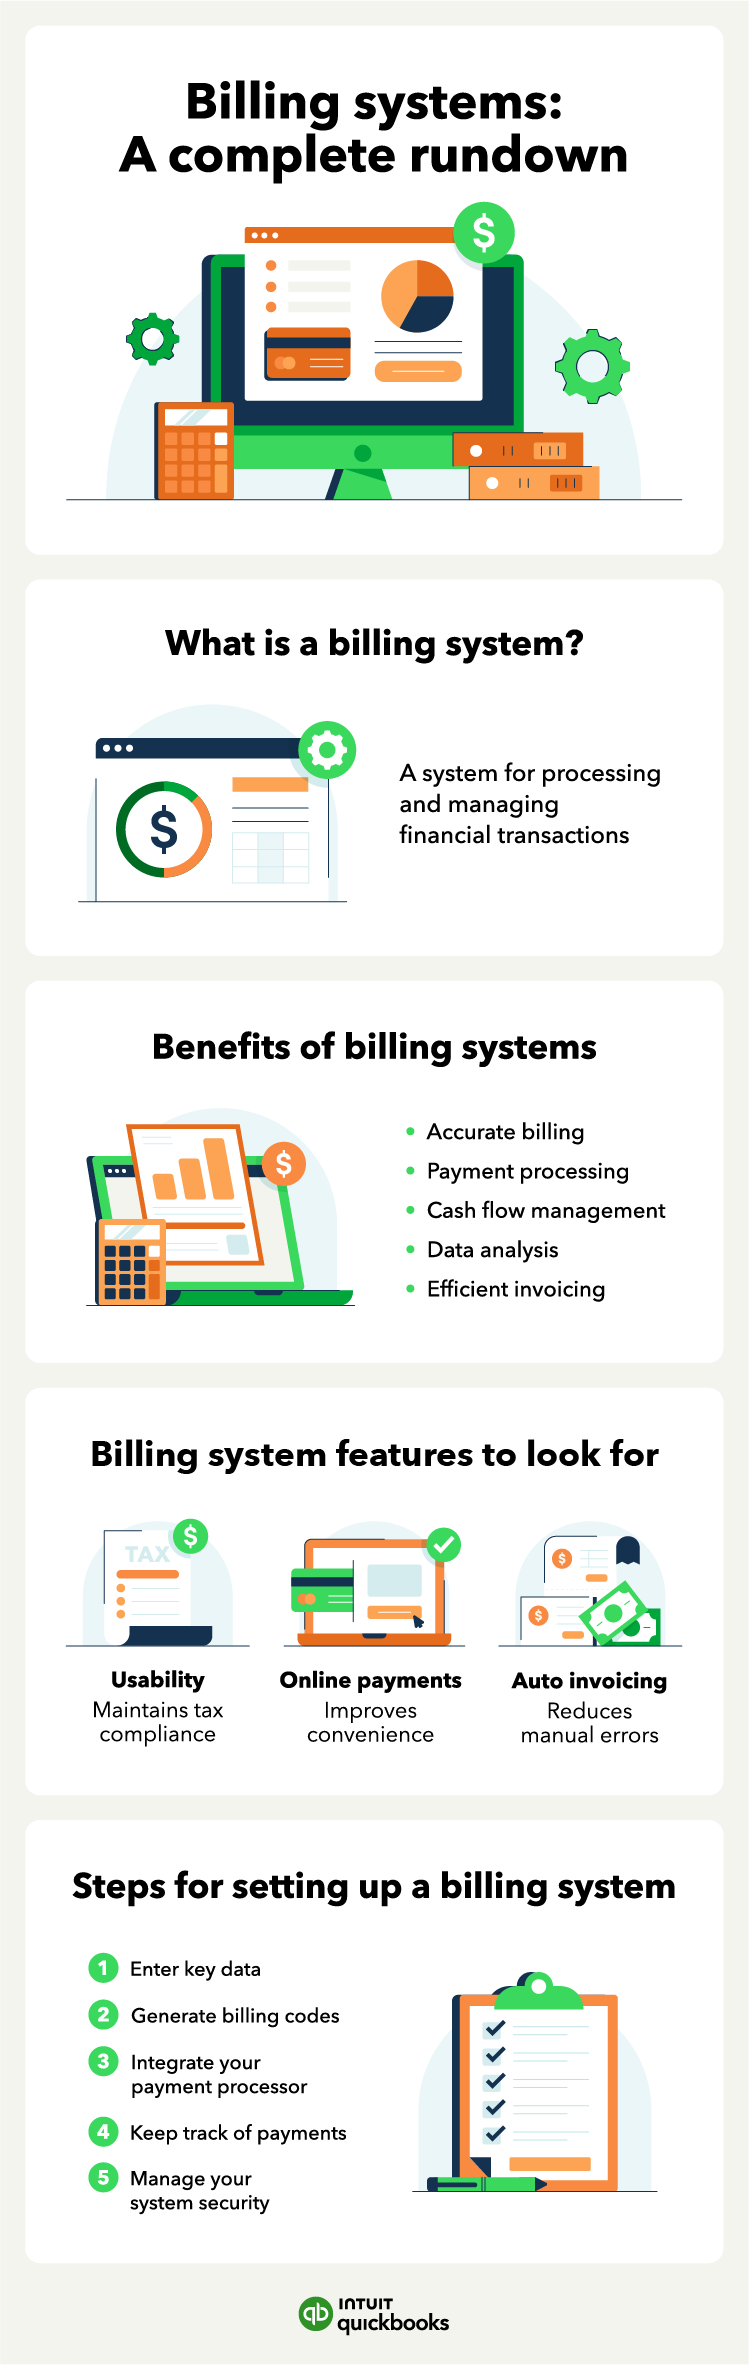 An infographic of what a billing system is, its benefits, features to look for, and how to set one up.